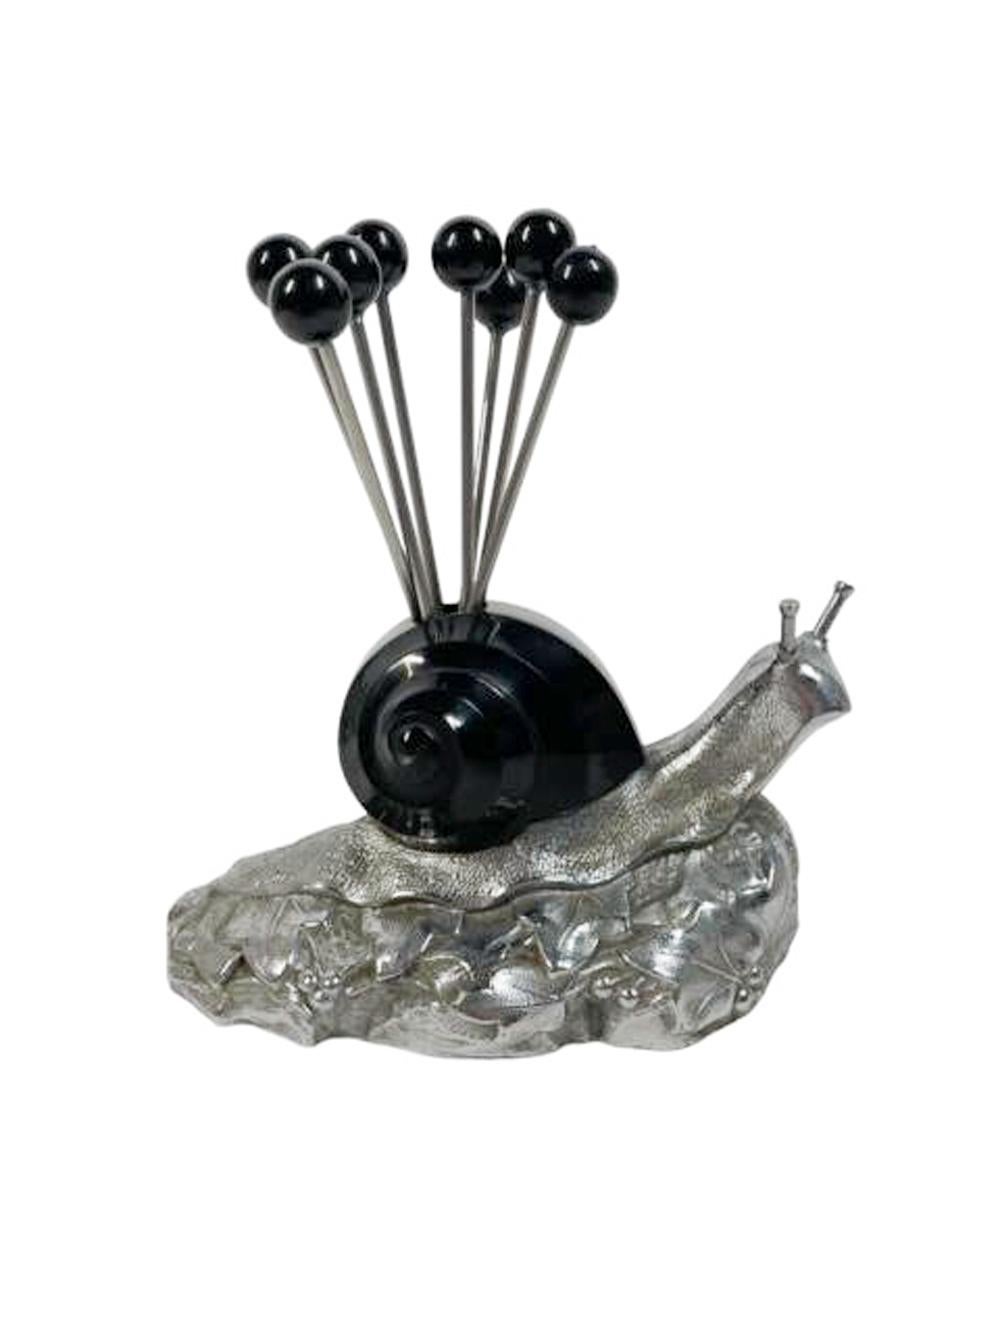 Art Deco Chrome and Black Bakelite Ball-Top Cocktail Picks and Snail-Form Stand In Good Condition For Sale In Nantucket, MA